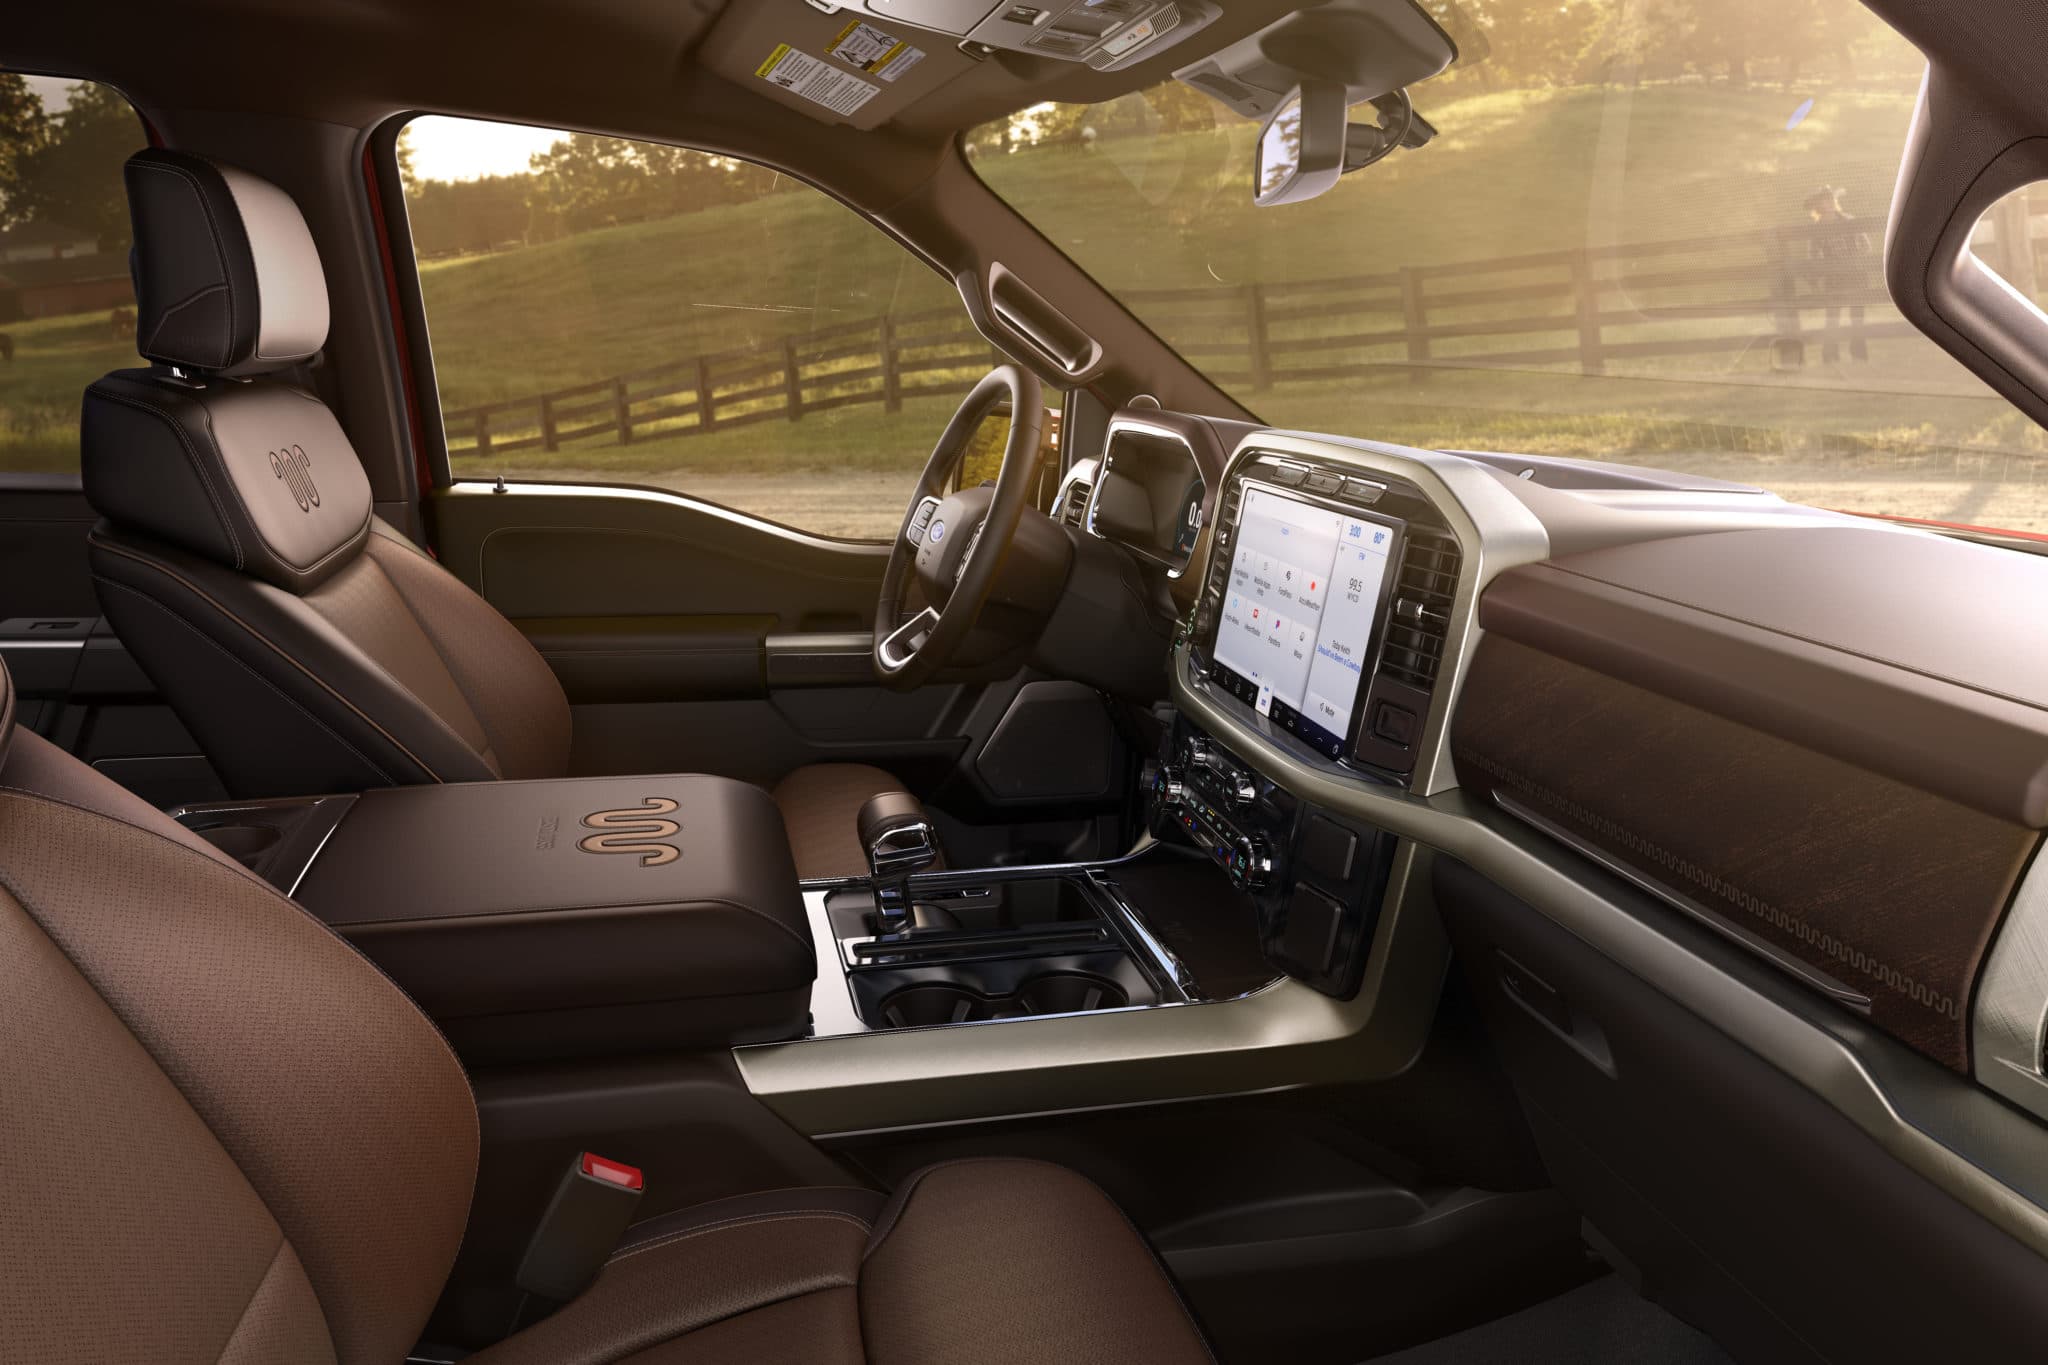 King Ranch Hybrid Shows Off F150 Capabilities The BRAKE Report